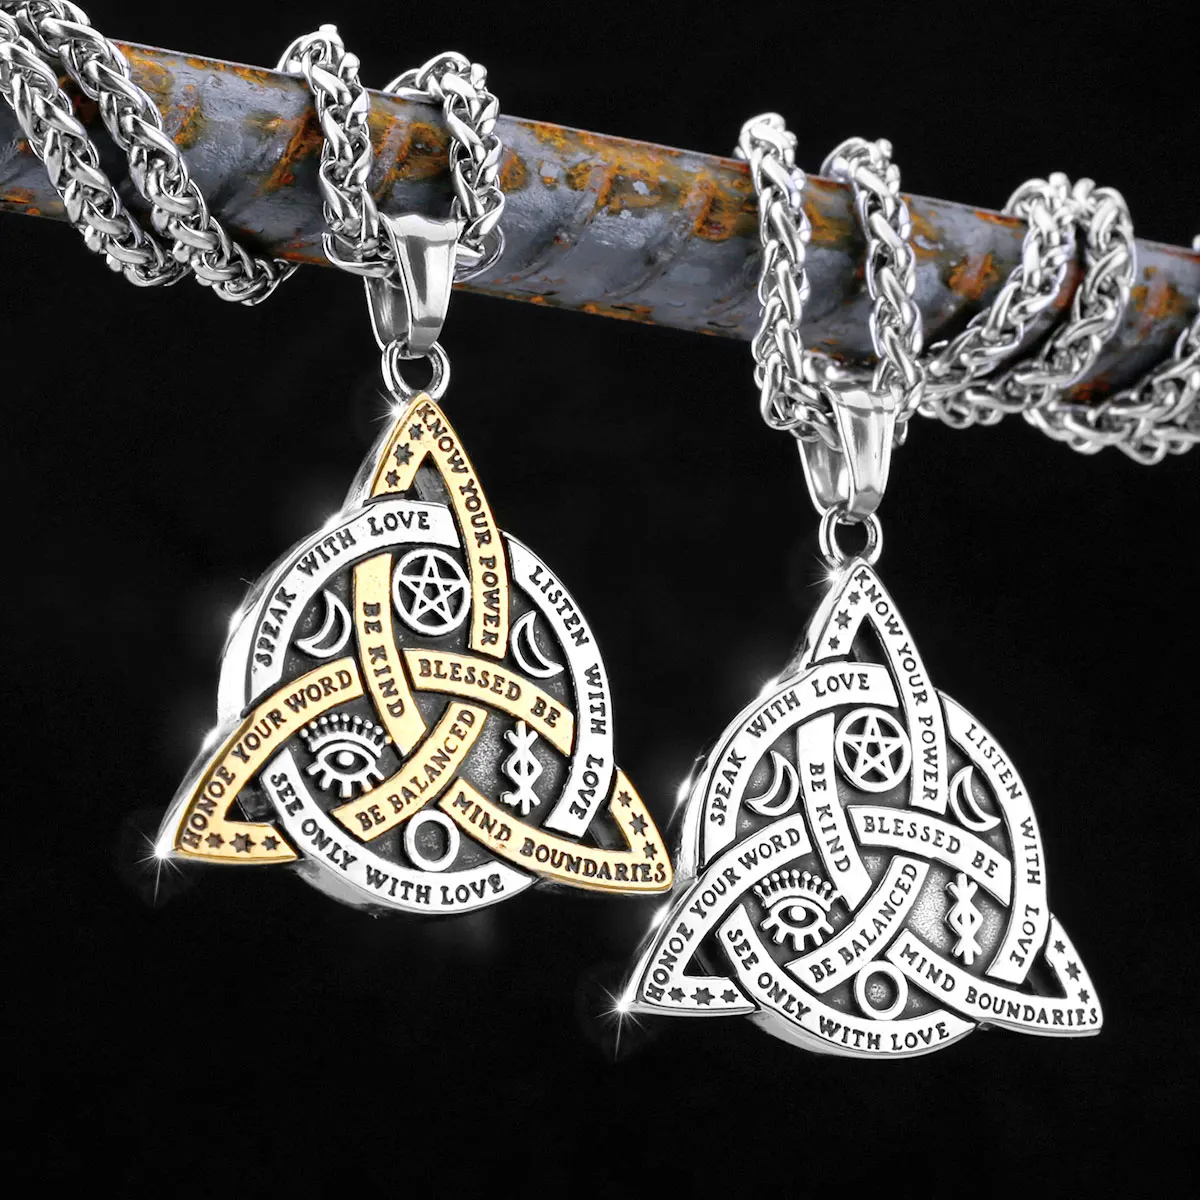 

Viking Witch Celtic Knot Pendant Necklace Rune Stainless Steel Men Chain Odin Gothic Necklace Protection Amulet Jewelry Gifts